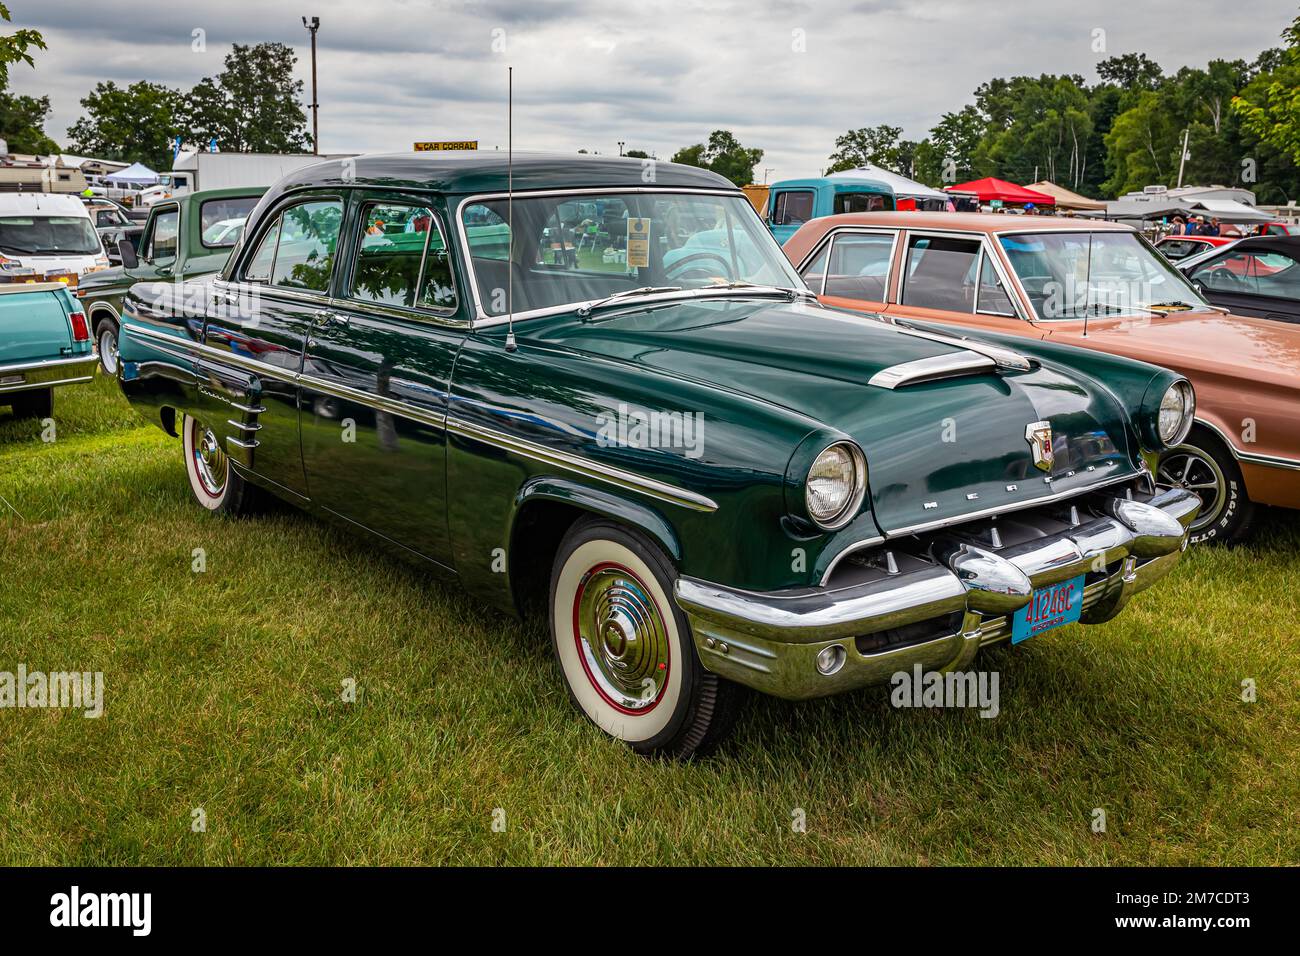 Iola, WI - July 07, 2022: High perspective front corner view of a 1953 Mercury Monterey 4 Door Sedan at a local car show. Stock Photo